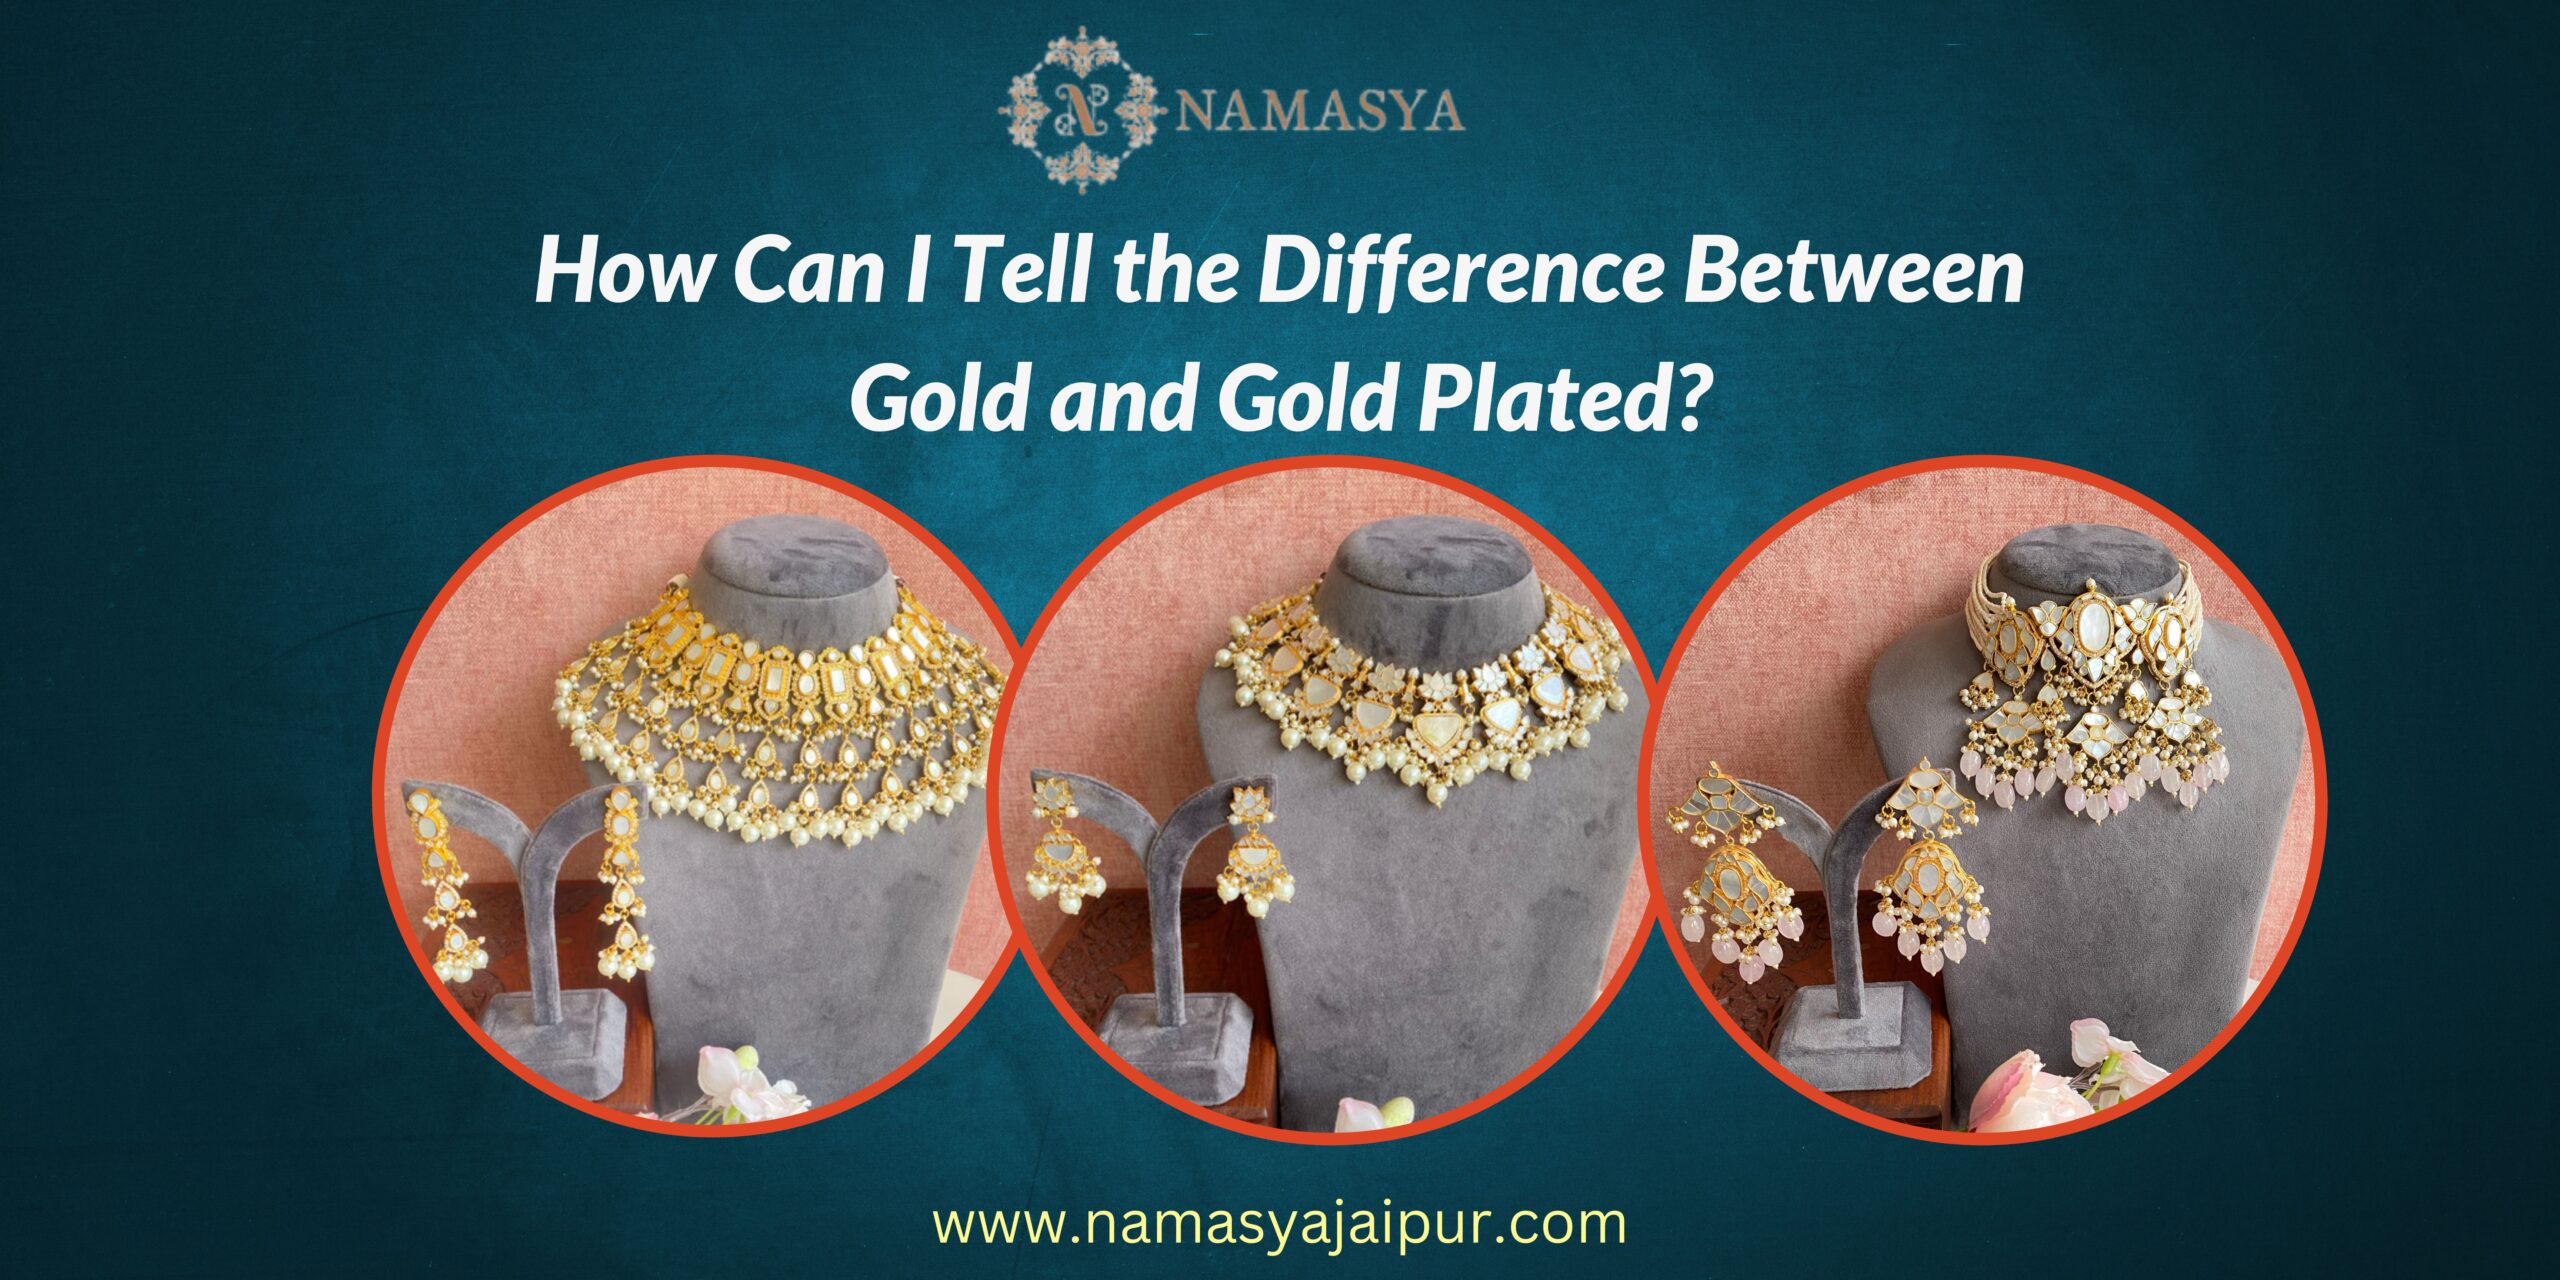 HOW CAN I TELL THE DIFFERENCE BETWEEN GOLD AND GOLD PLATED?